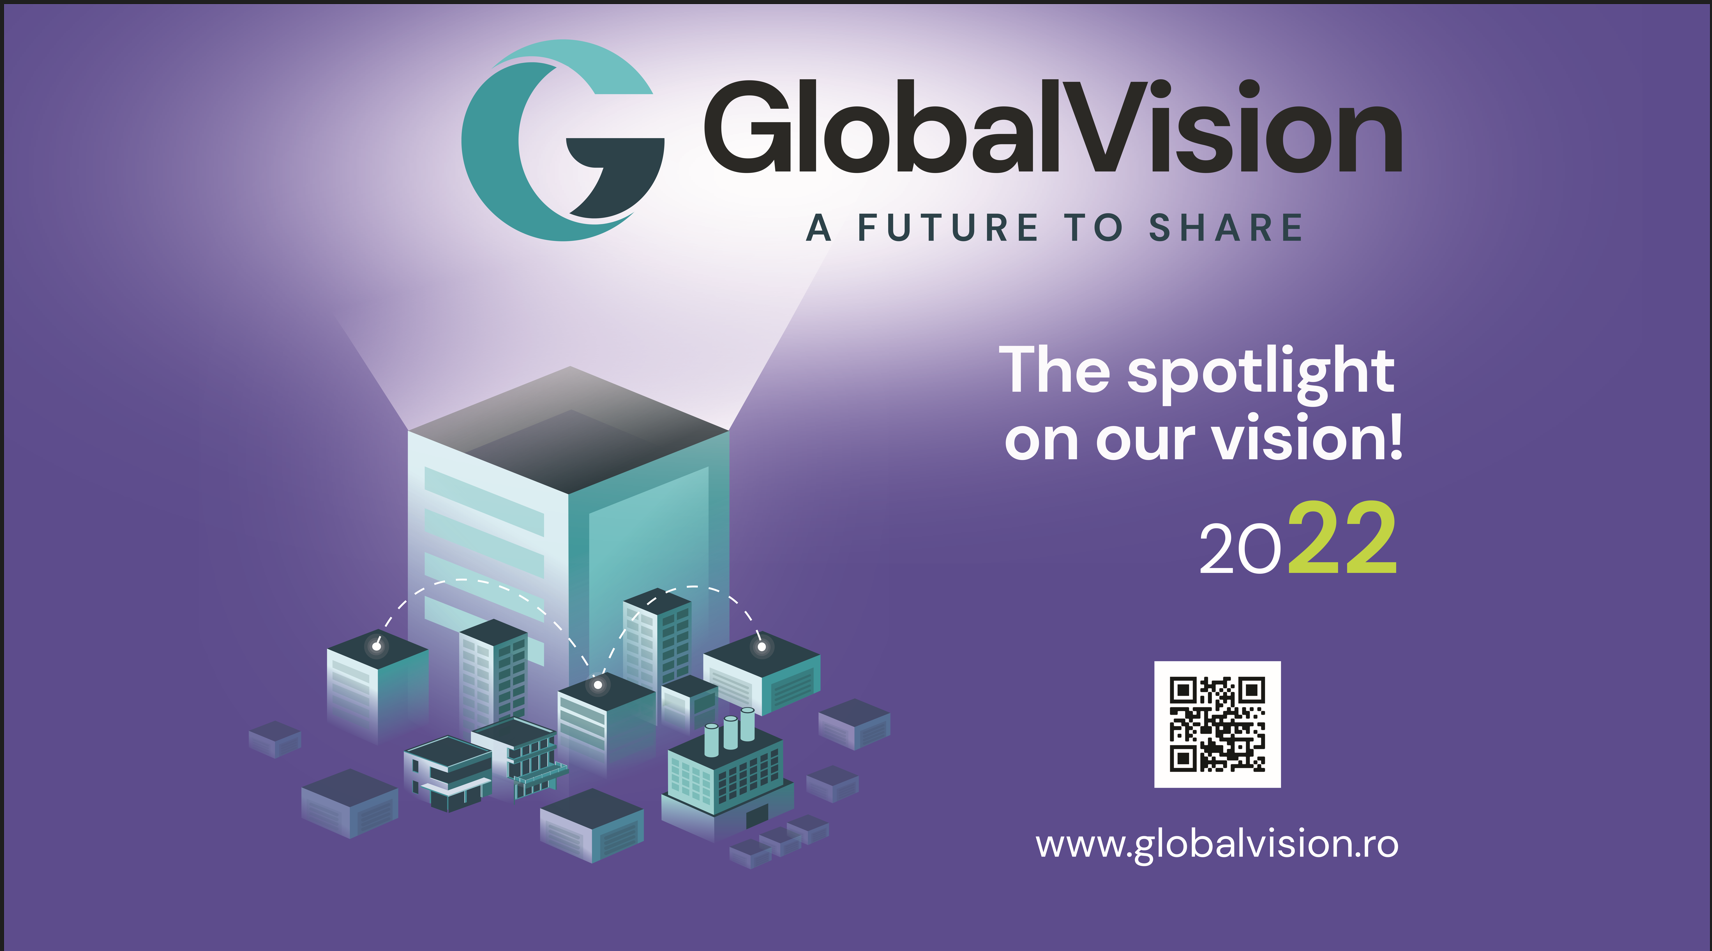 THE SPOTLIGHT ON OUR VISION!